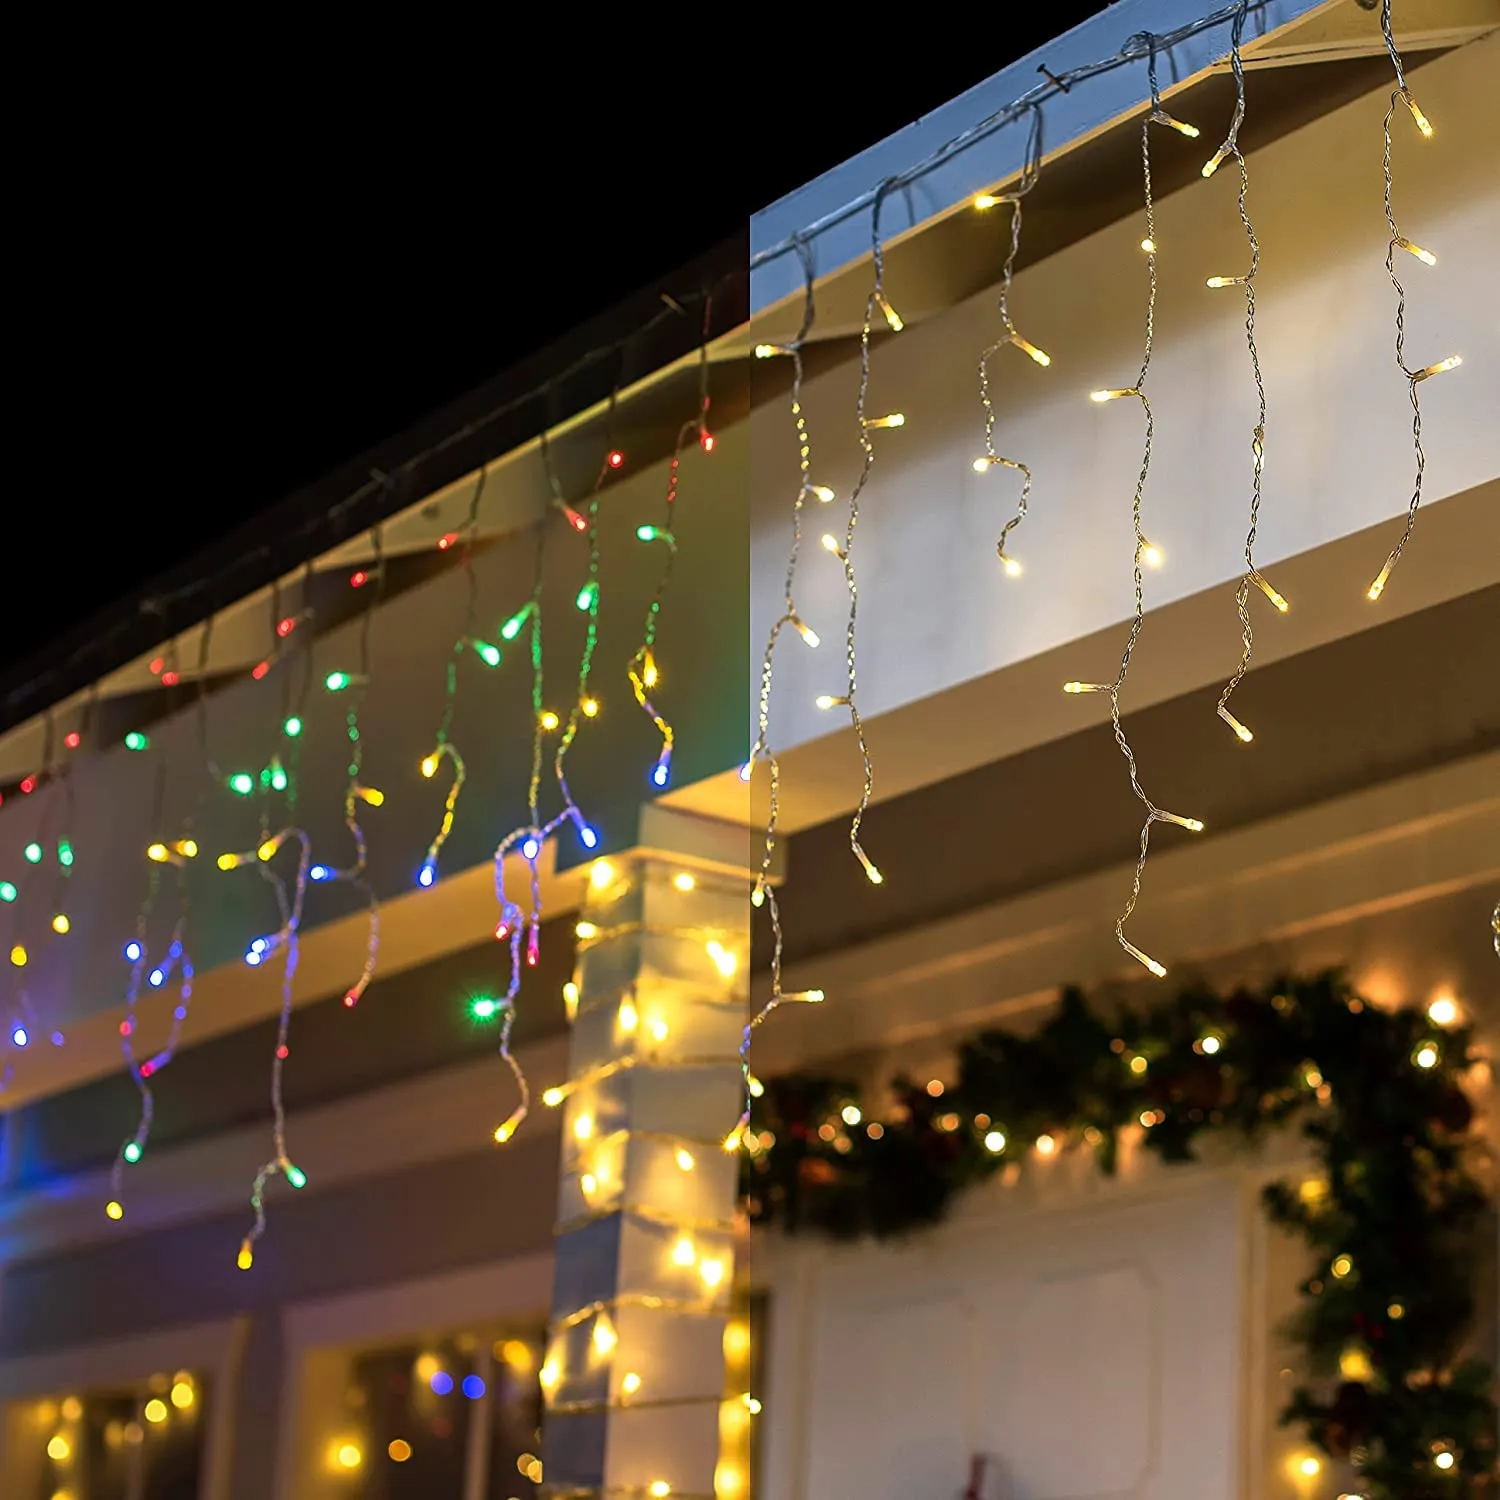 You are currently viewing 2022 best Christmas multi color icicle lights inspiration